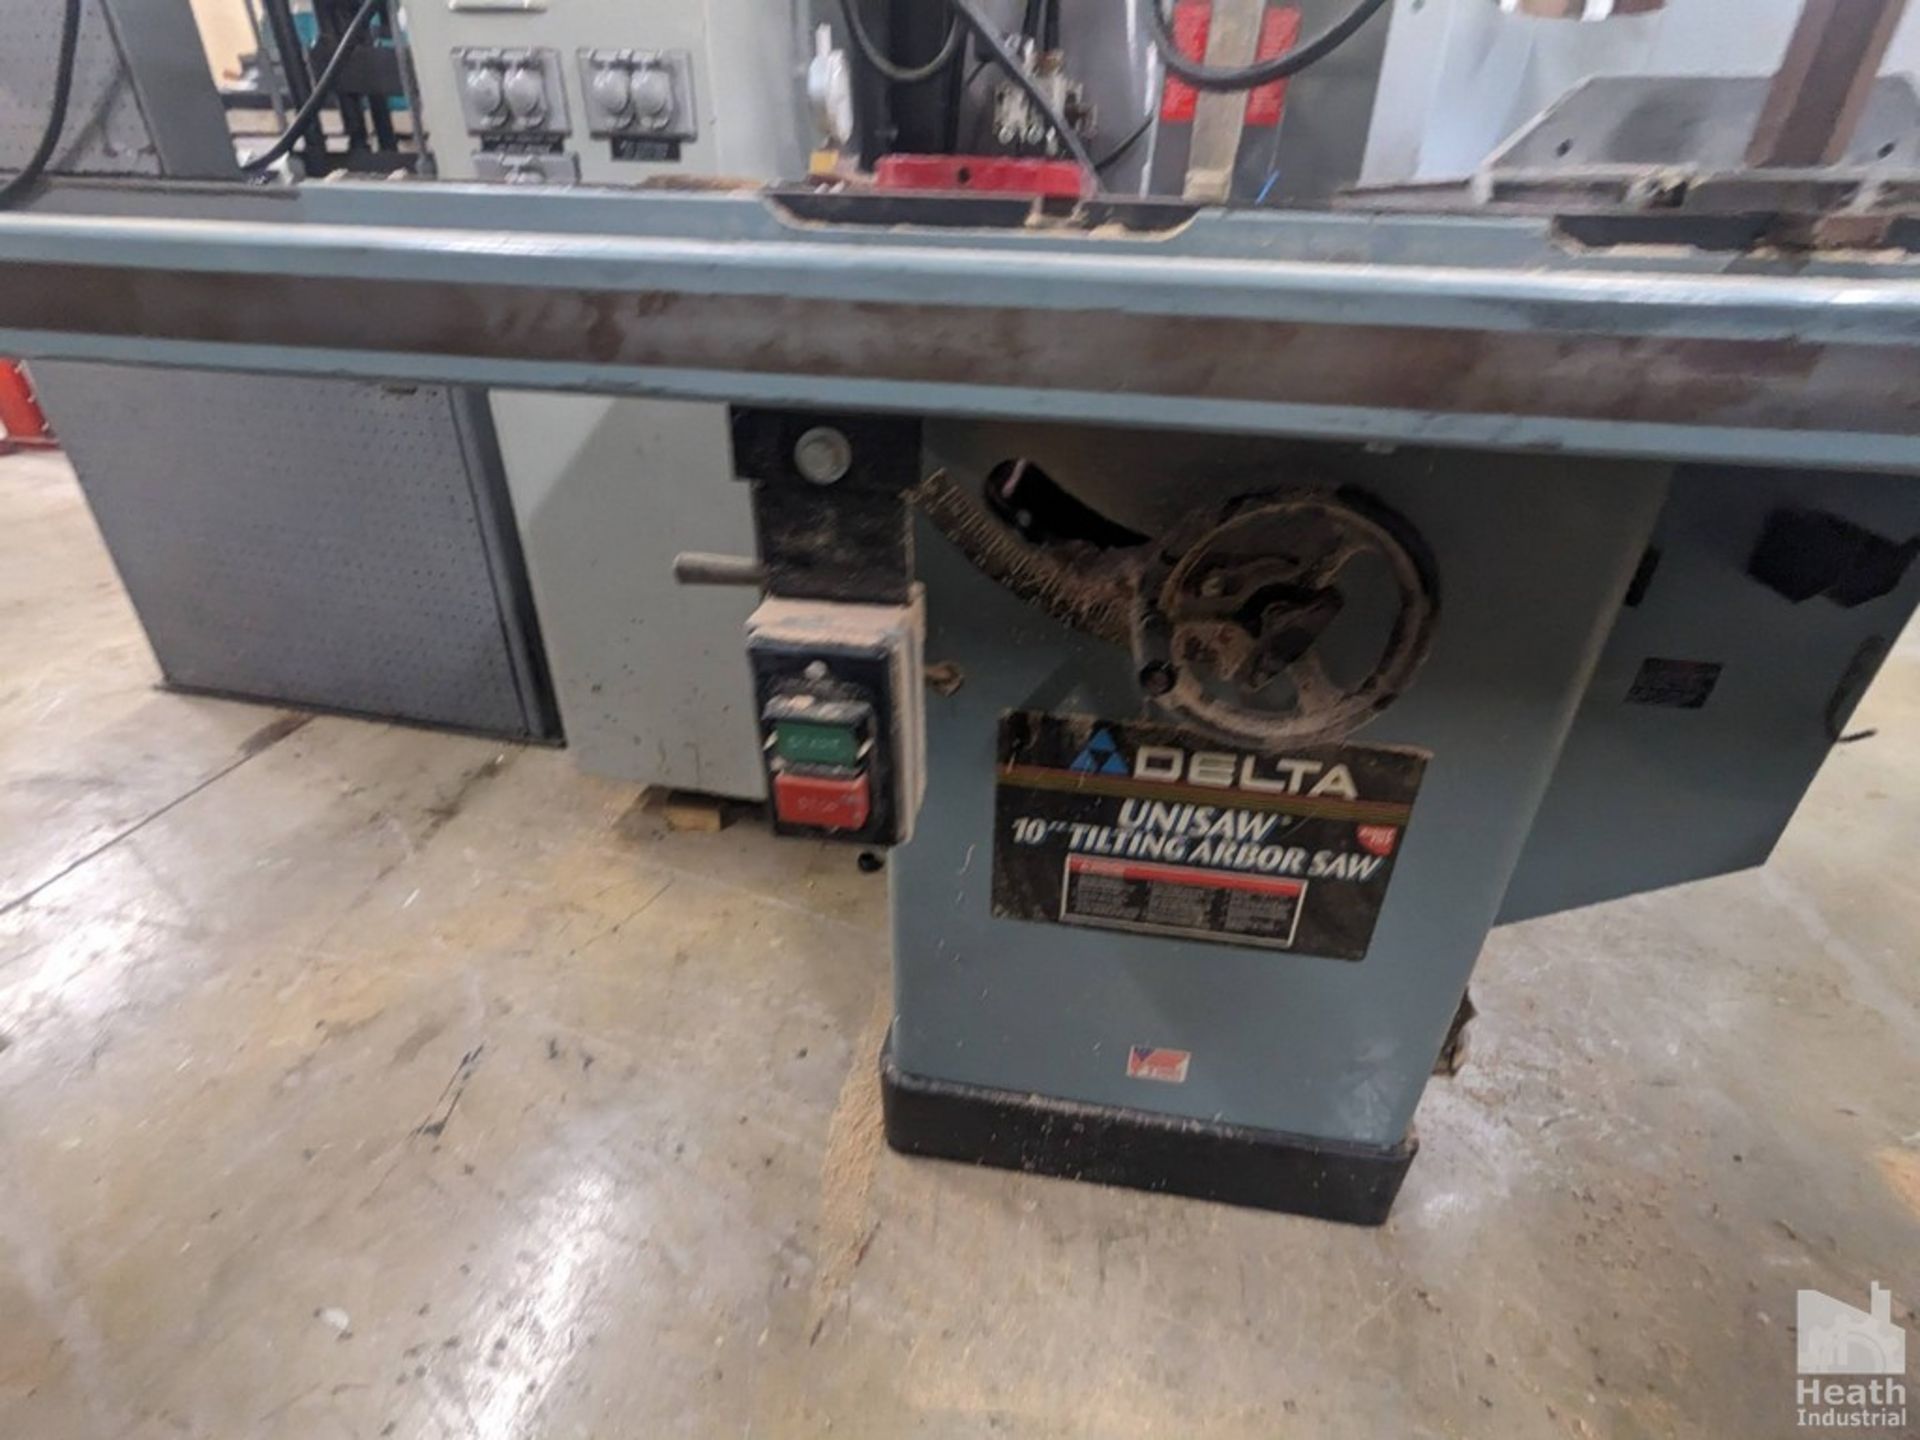 DELTA UNISAW 10" TILTING ARBOR TABLE SAW WITH EXTENDED TABLE BEISEMETER FENCE Loading Fee :$100 - Image 3 of 8